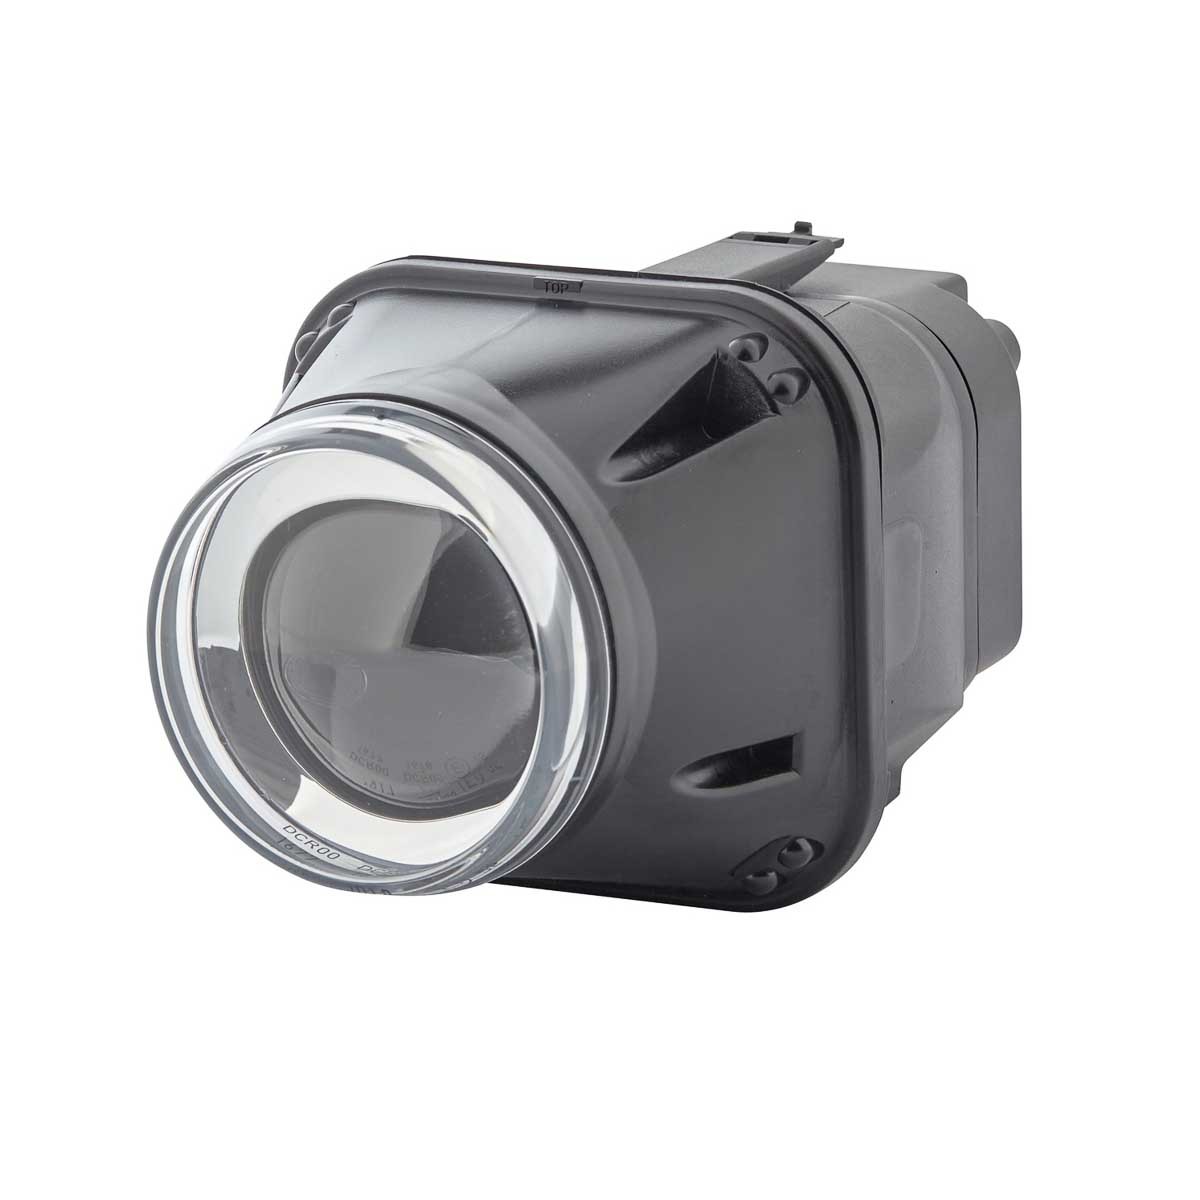 90 mm Bi-Xenon HELLA Left, Right, D2S, Bi-Xenon, 24V, with low beam, with high beam x 123 mm x 90 mm, for right-hand traffic, with bulb Left-hand/Right-hand Traffic: for right-hand traffic Front lights 1AL 008 934-021 buy